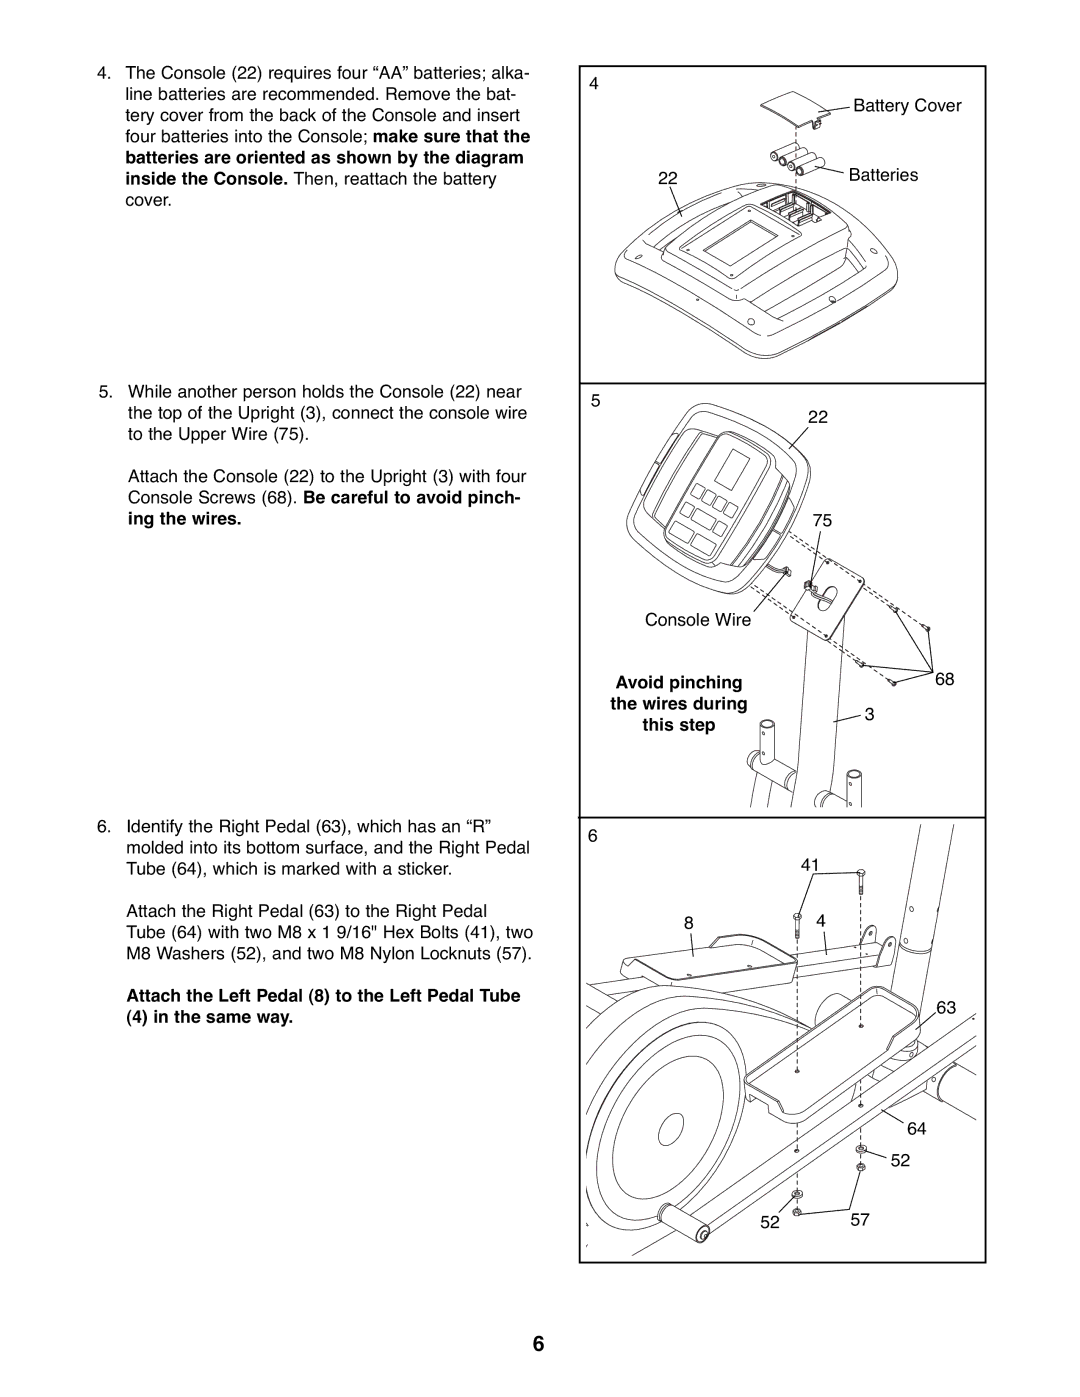 ProForm PFEVEL2486.0 user manual Attach the Left Pedal 8 to the Left Pedal Tube Same way 